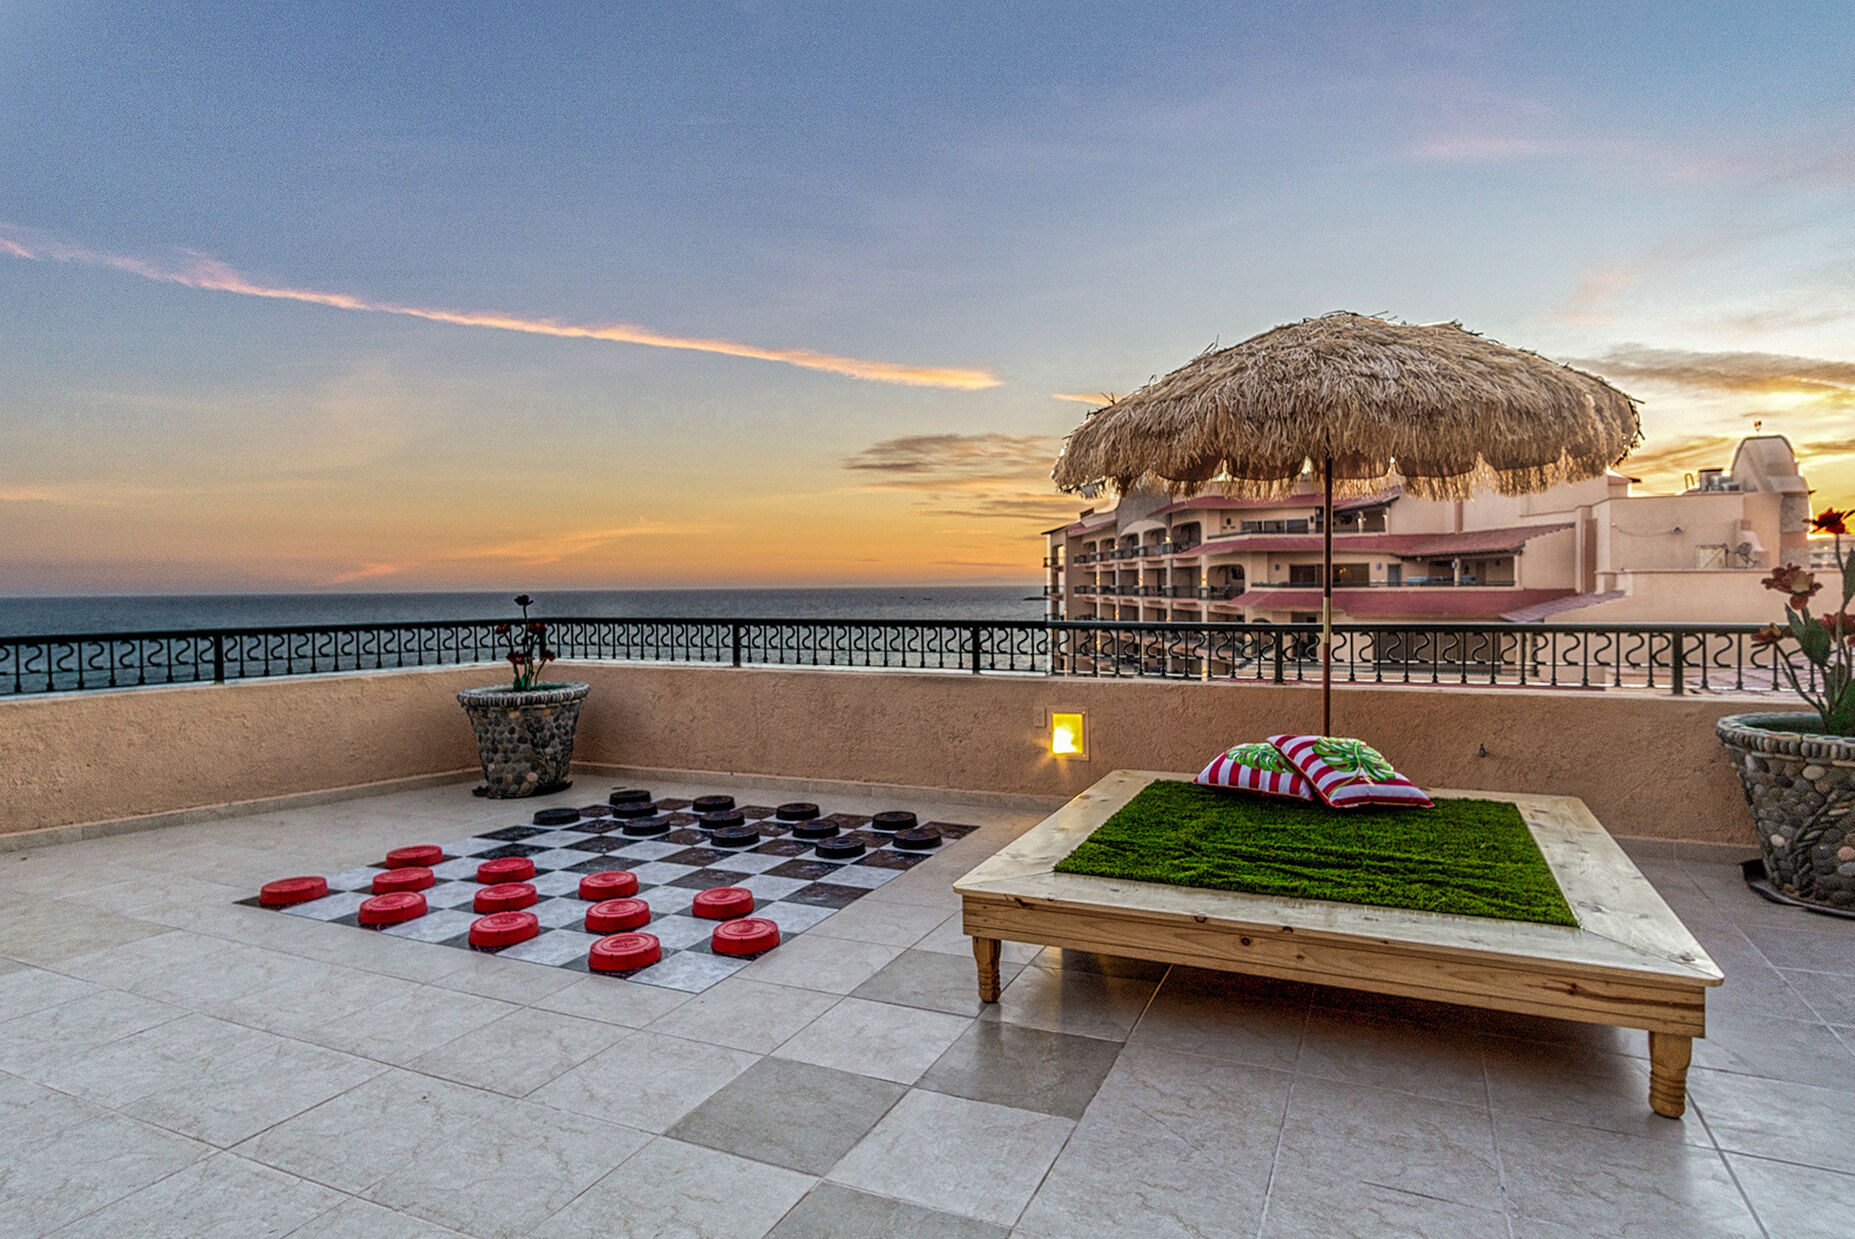 Lounger has palapa style shade and comfortable turf.